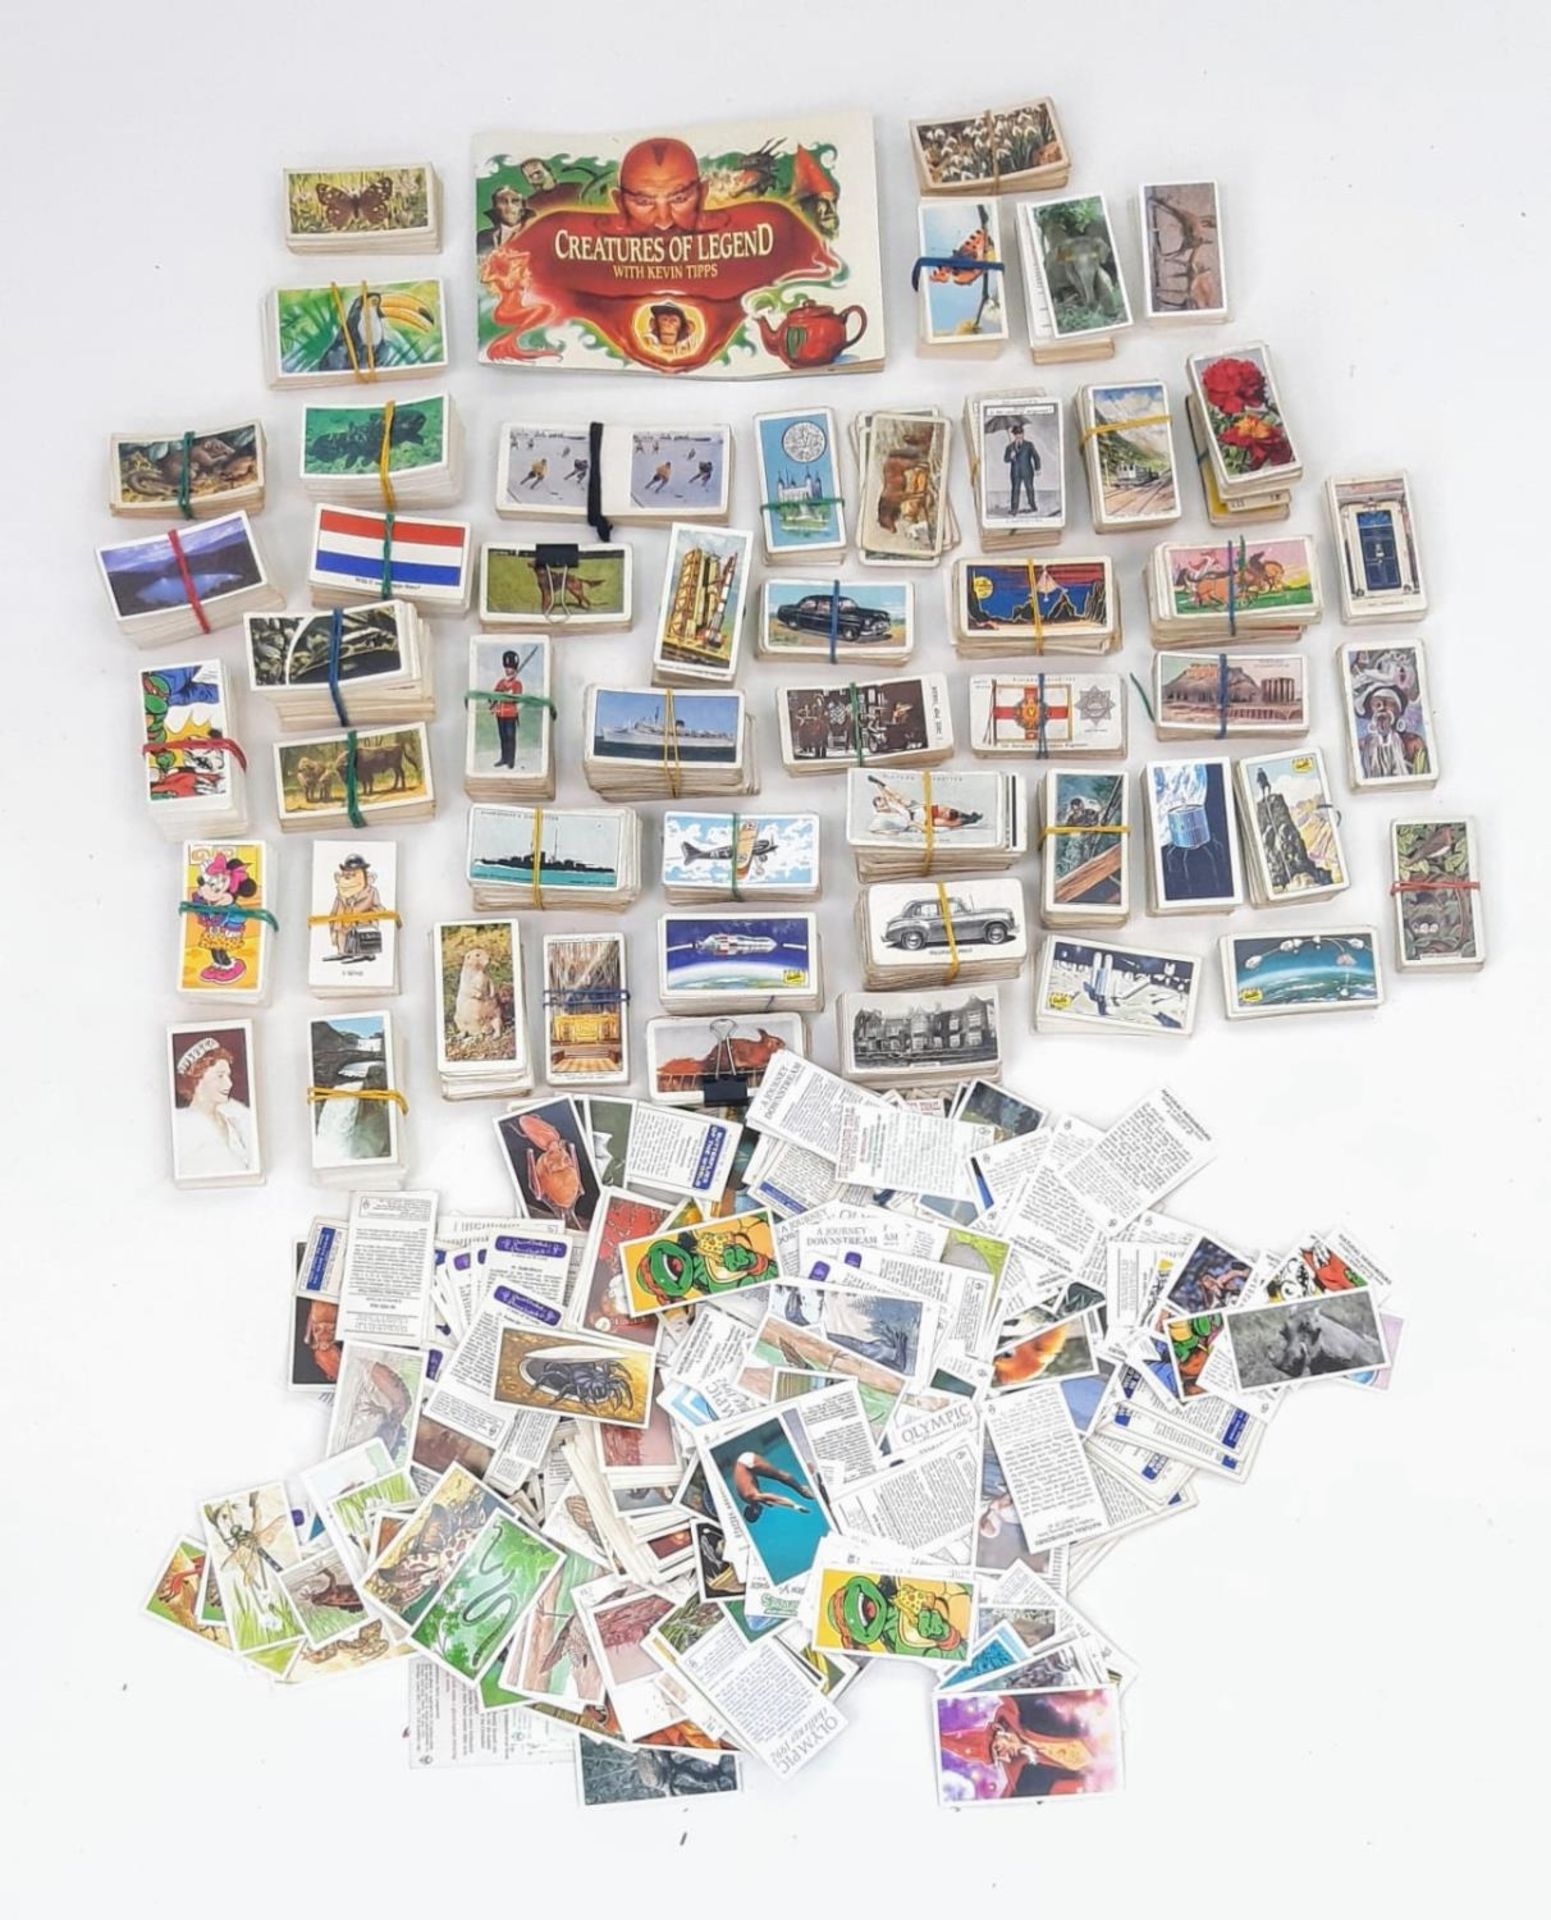 A Large Bag of Collectible Vintage and Antique Cigarette Cards. - Image 2 of 8